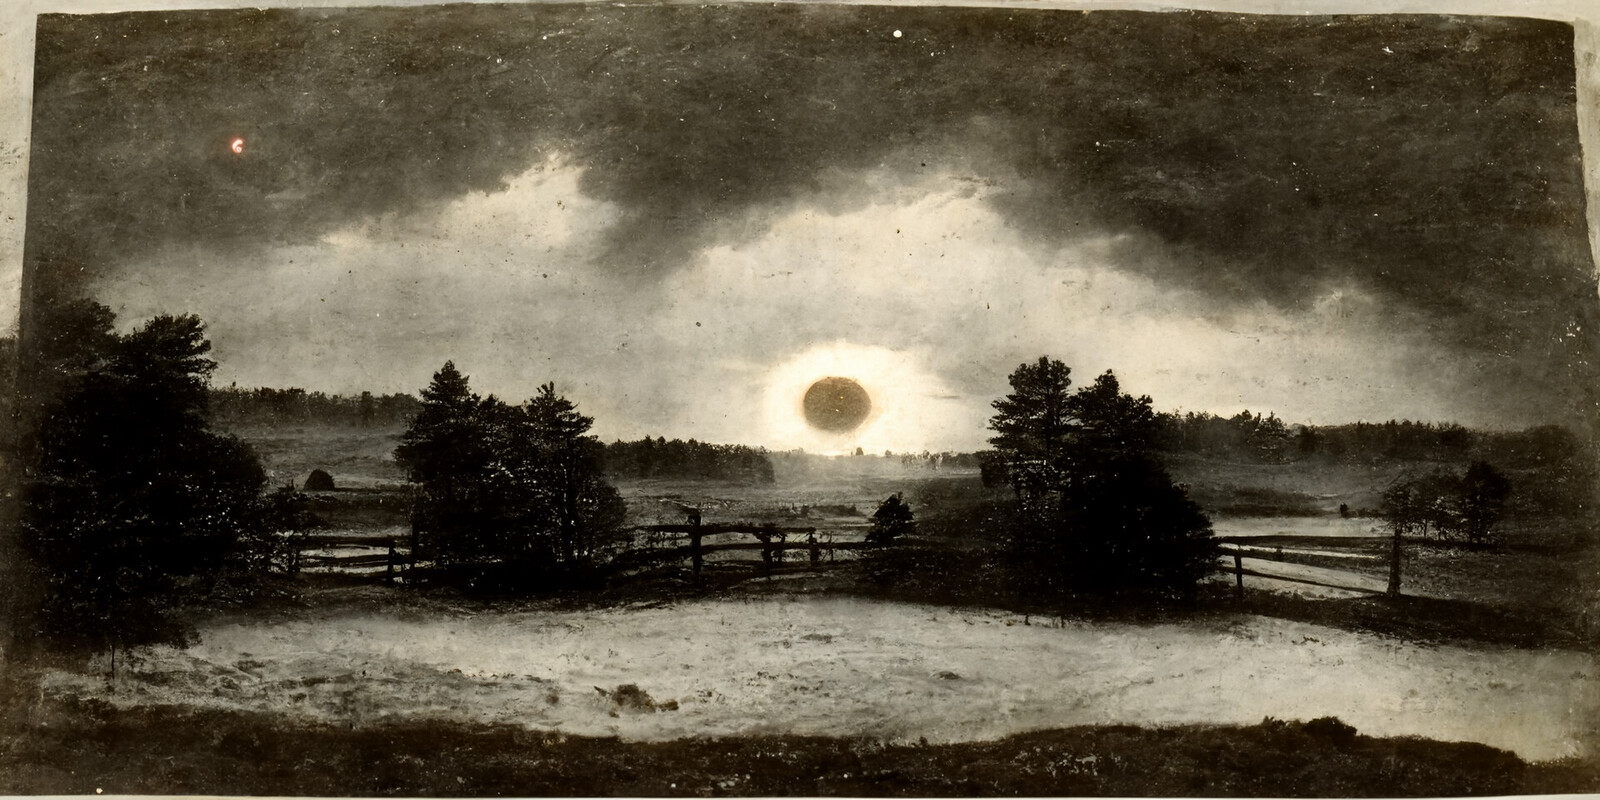 Connecticut sunrise
c. 1924
Photograph
'I once was lost but now I'm found, was blind but now I see.'